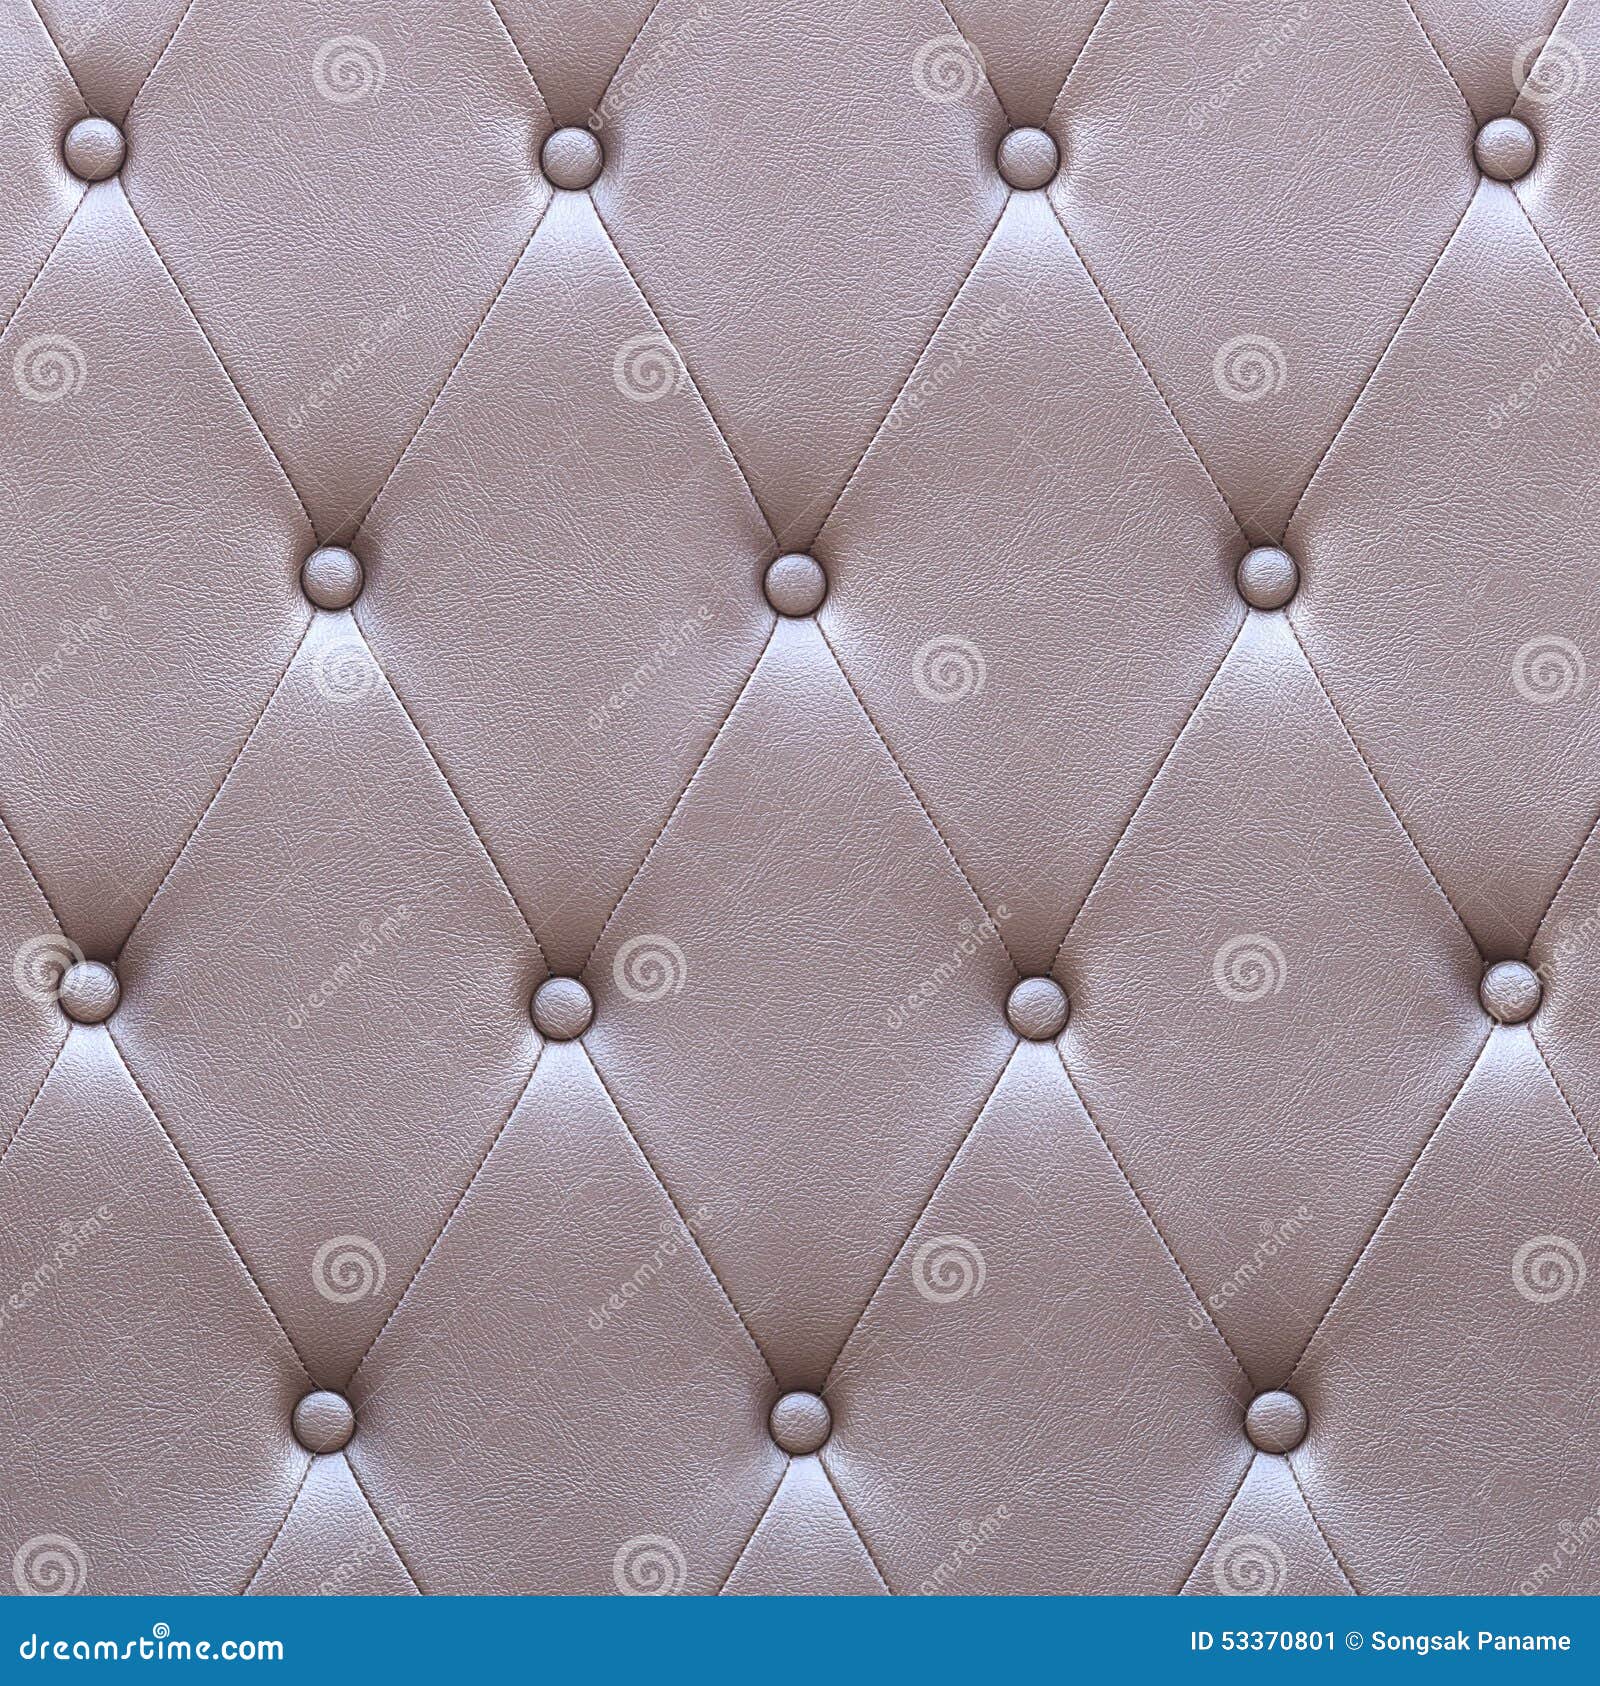 Pattern of Brown Leather Seat Upholstery Stock Image - Image of decor ...